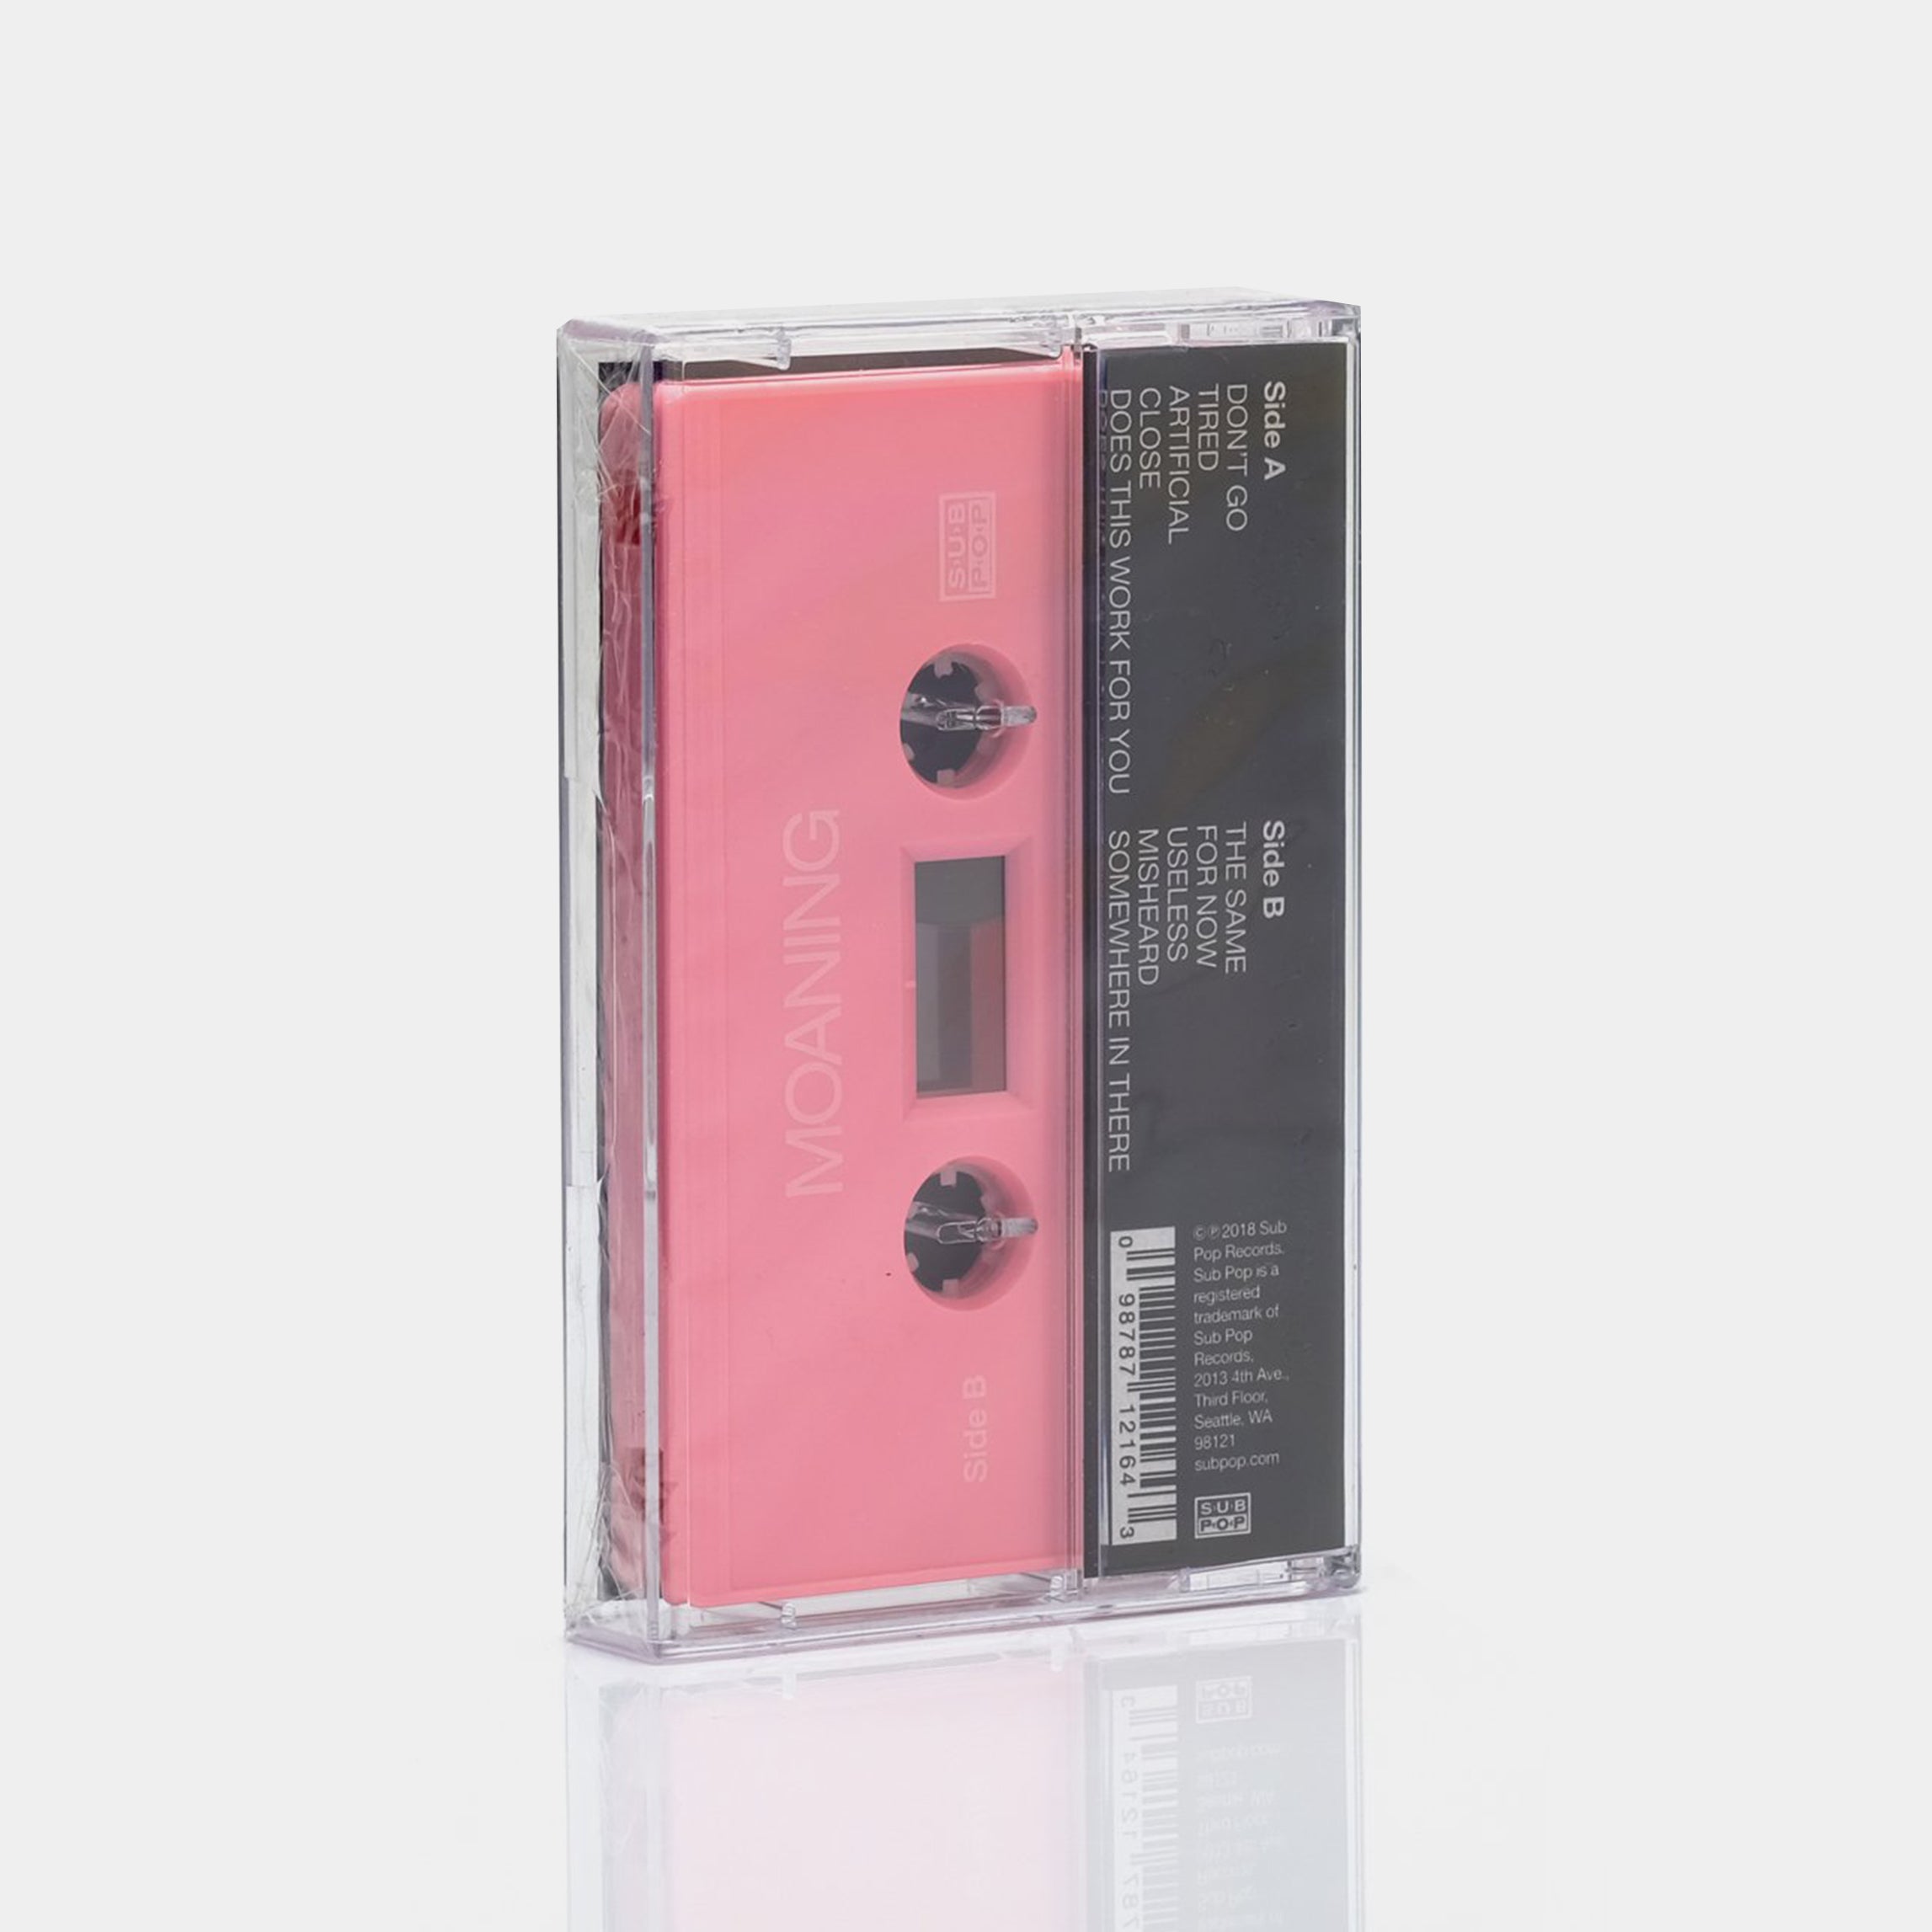 Moaning - Moaning Cassette Tape